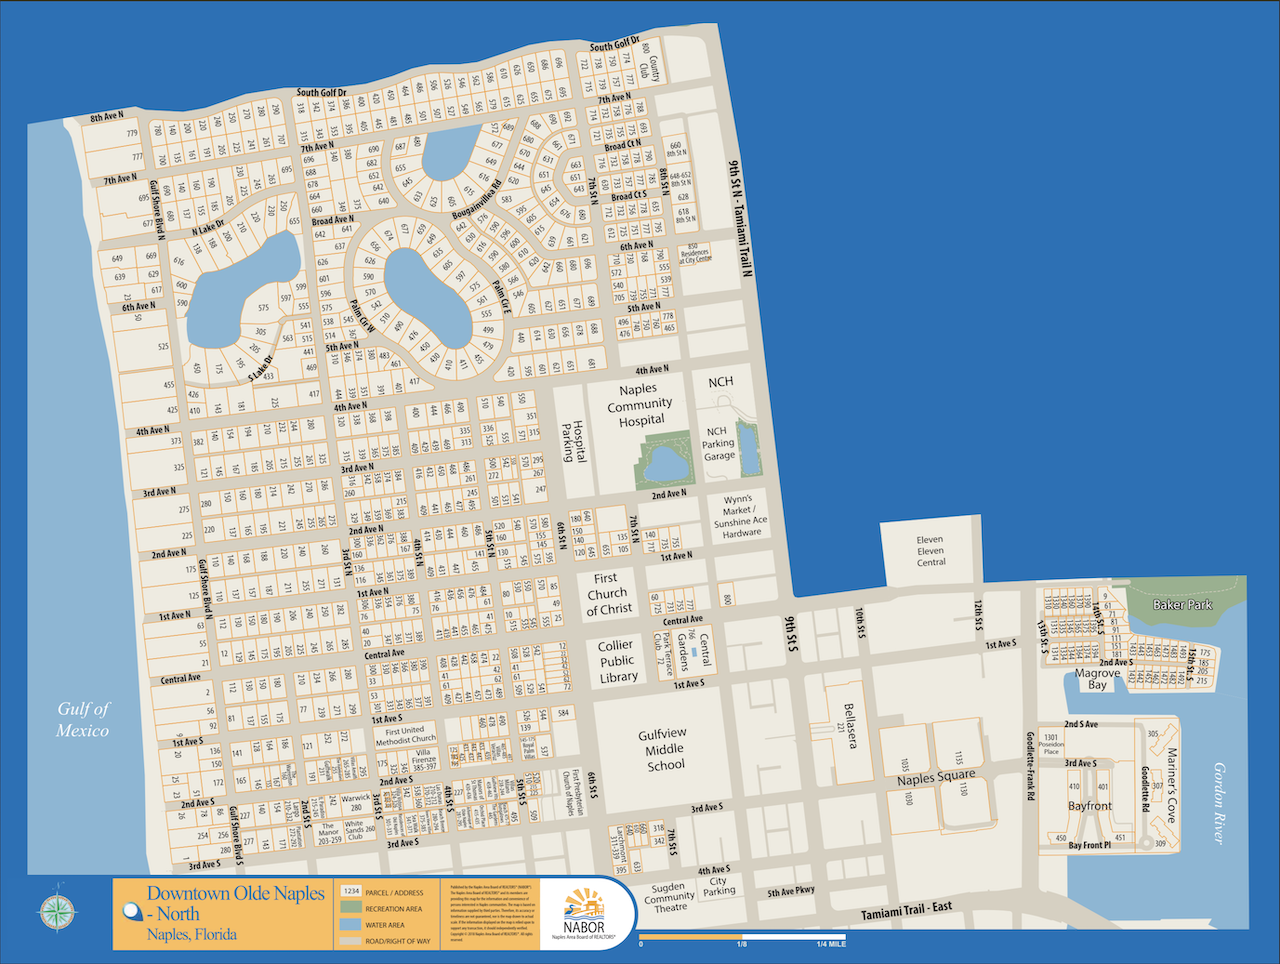 Downtown Olde Naples - North map